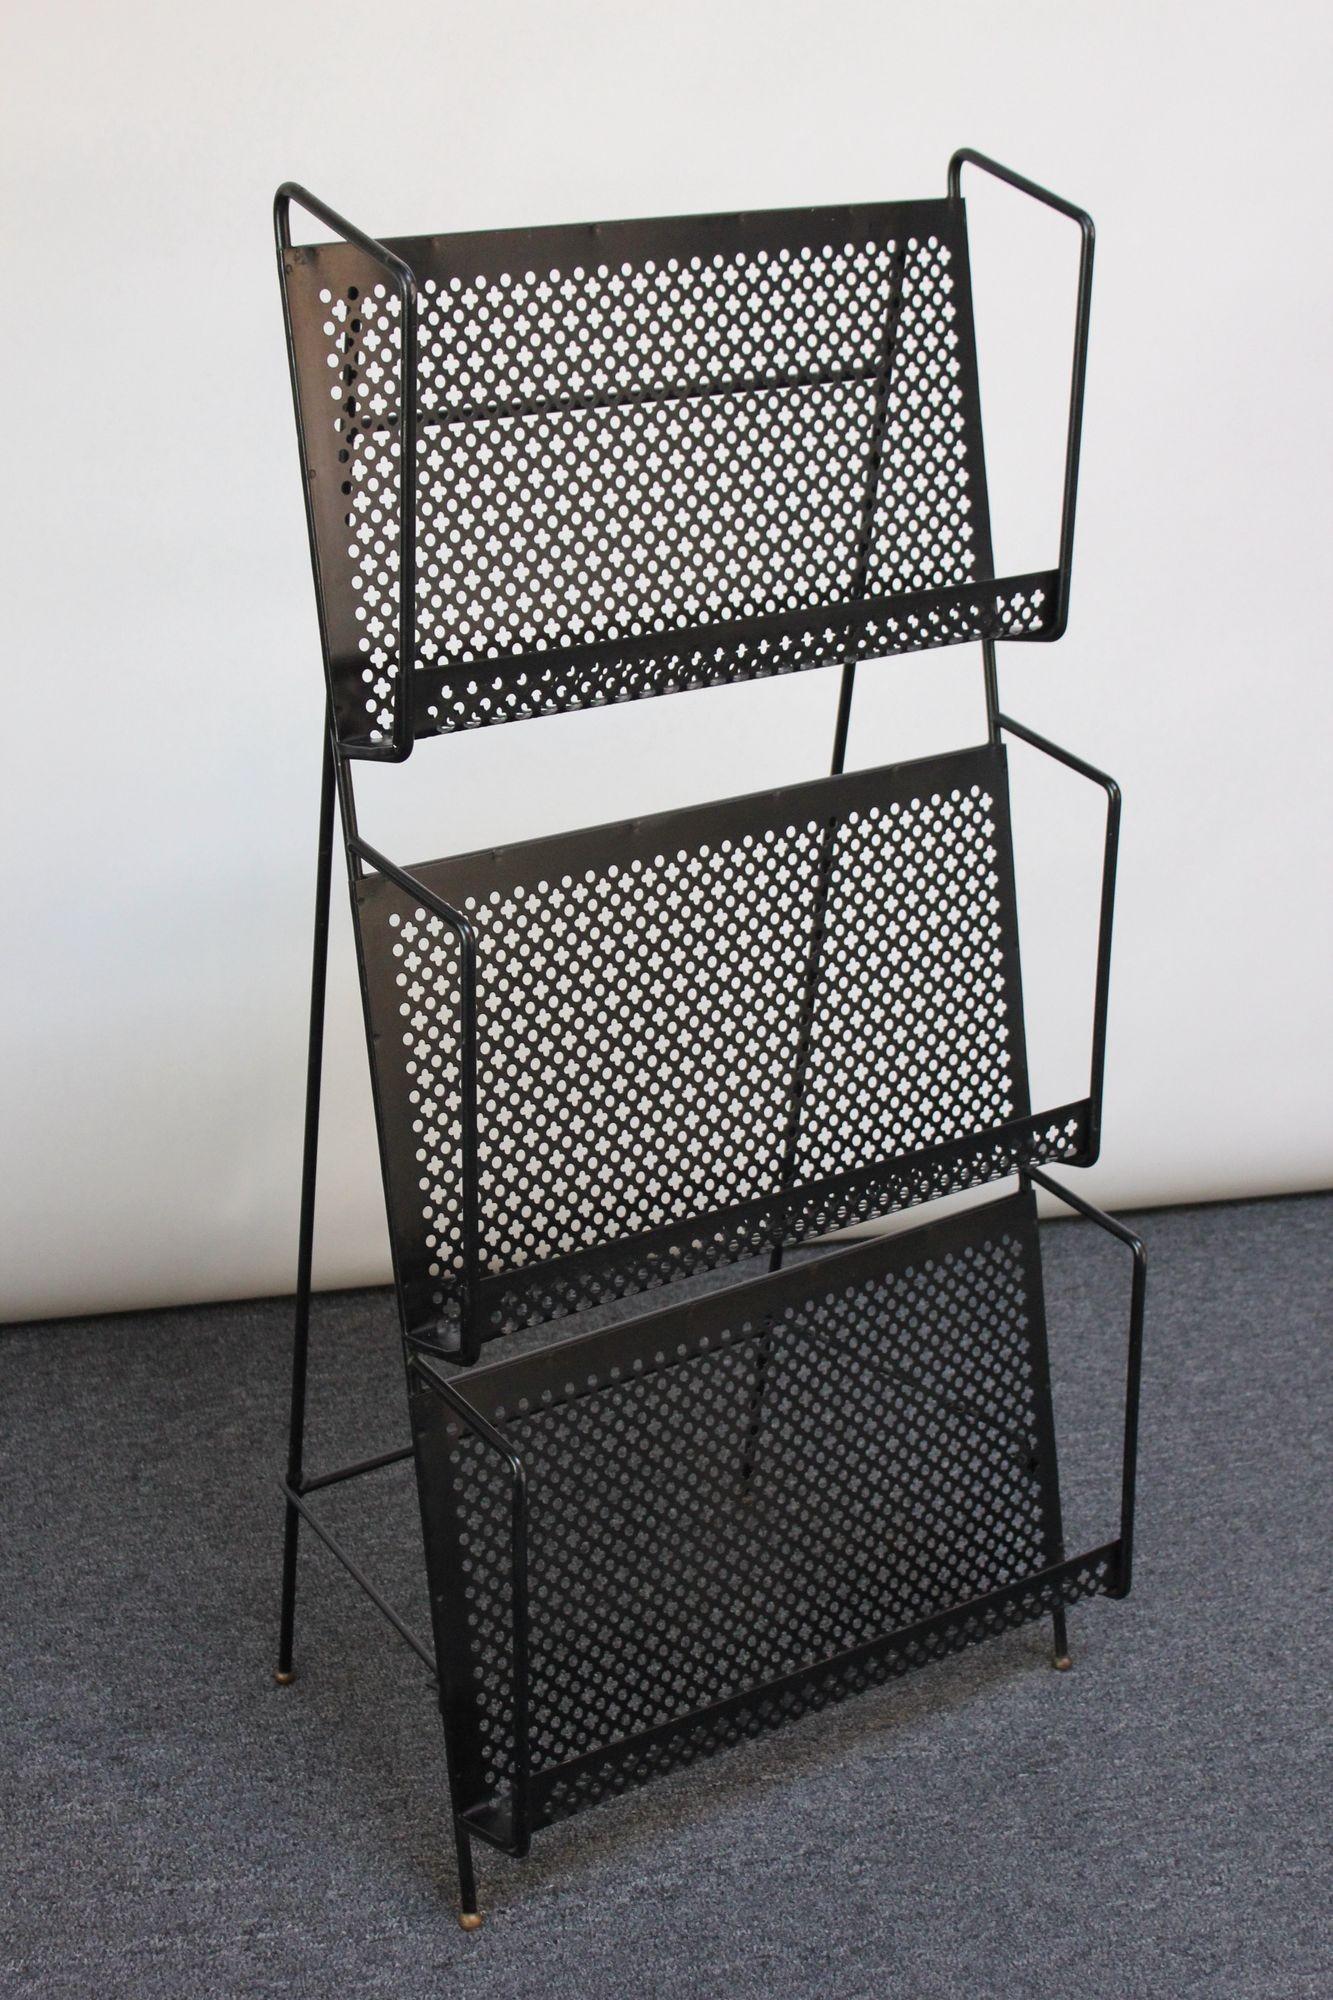 Large, free-standing three-tier magazine rack in black enameled metal with perforated cross and circle motif, all supported by gold, orb feet (ca. 1950s, USA). Each tier is 2.75